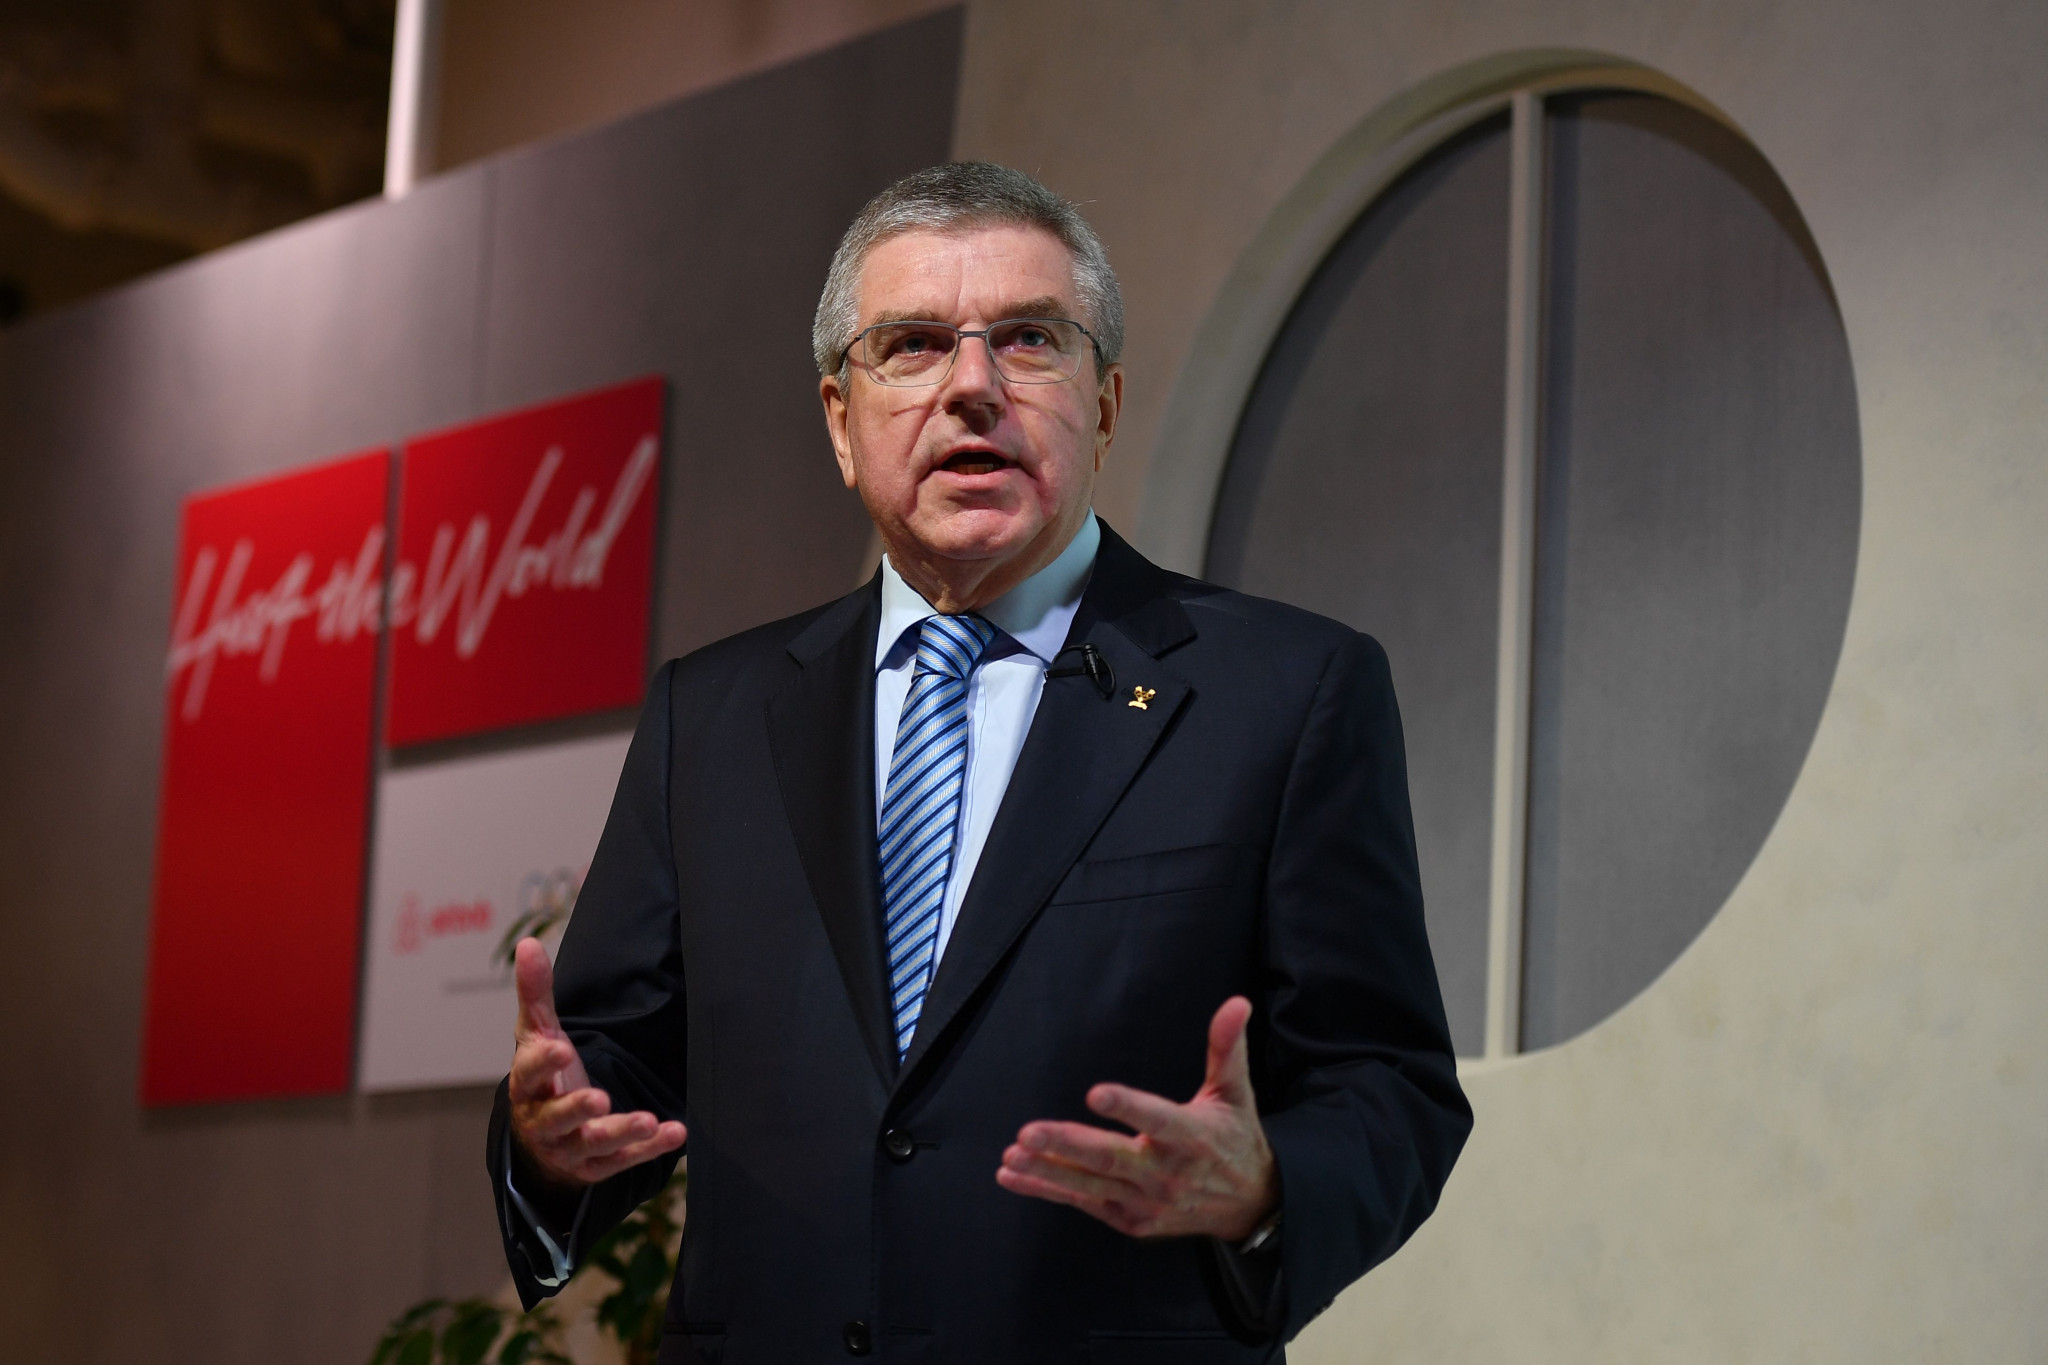 IOC President Thomas Bach warned this week they were not in favour of Russia being banned from Tokyo 2020 ©Getty Images